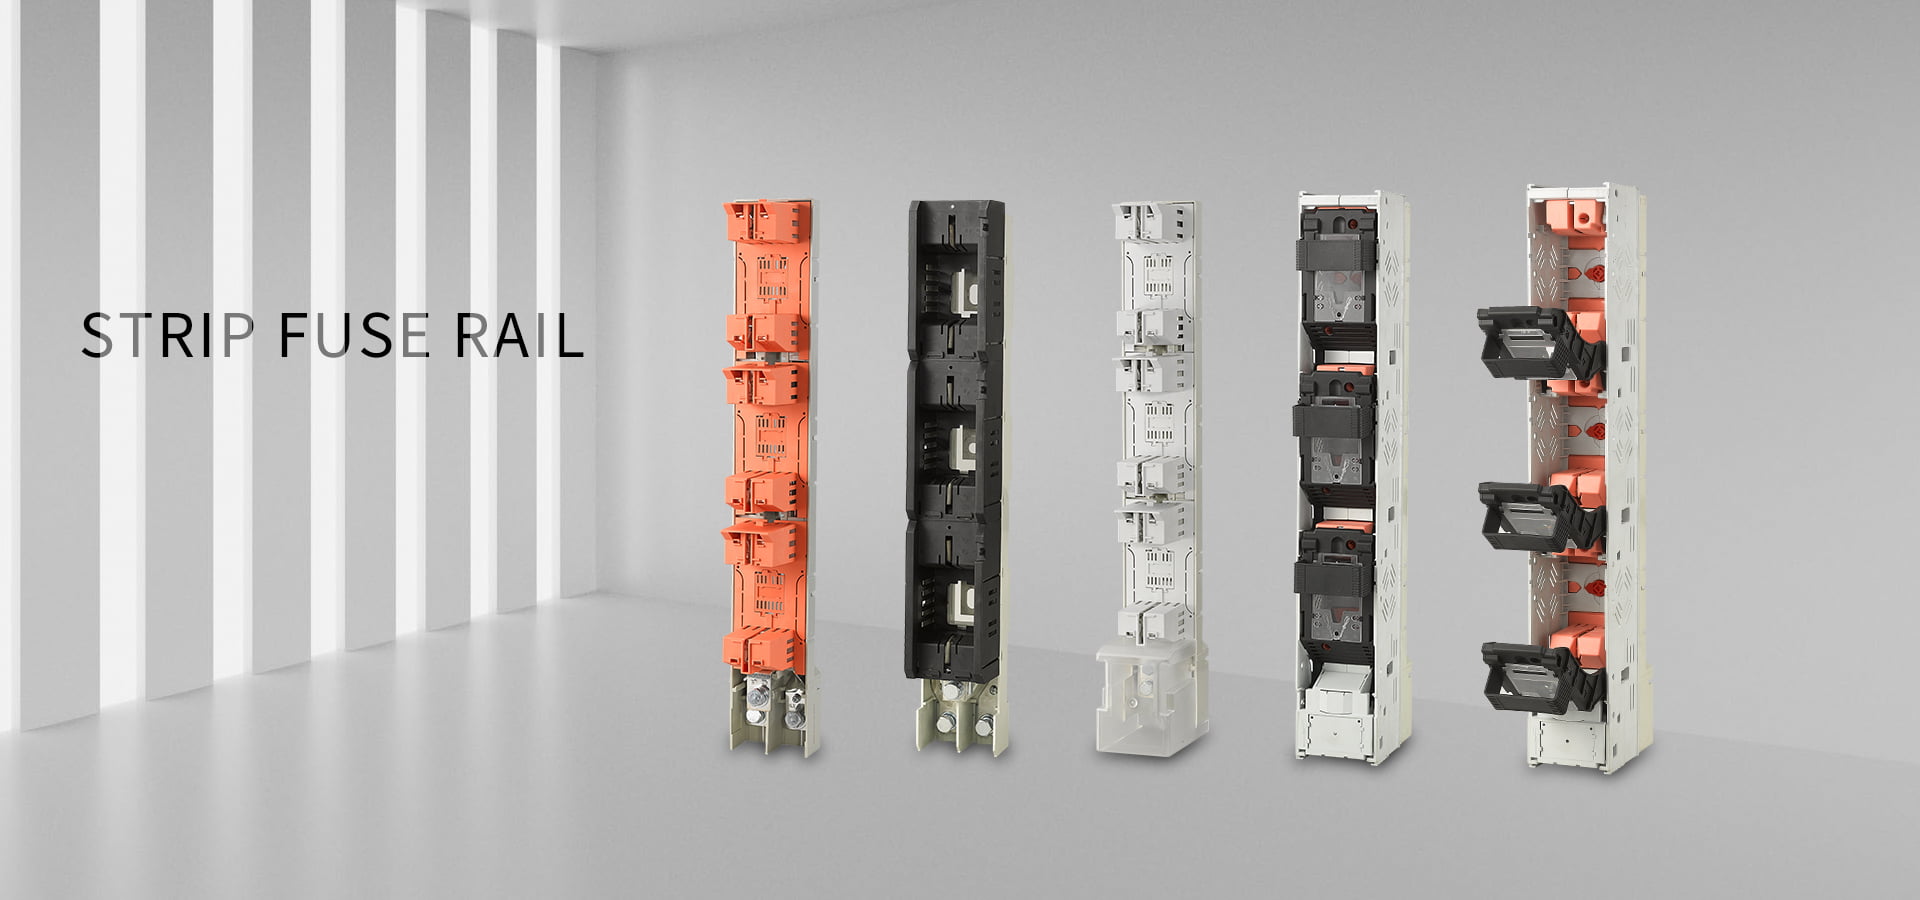 LV Strip fuse rail in switchgear panel boards
,NH vertical type fuse switch disconnector,MCB pan assembly in DB,copper busbar in distribution box,NH vertical fuse holder,250A fuse rail 185mm in feeder pillar,low voltage fuse base and fuse